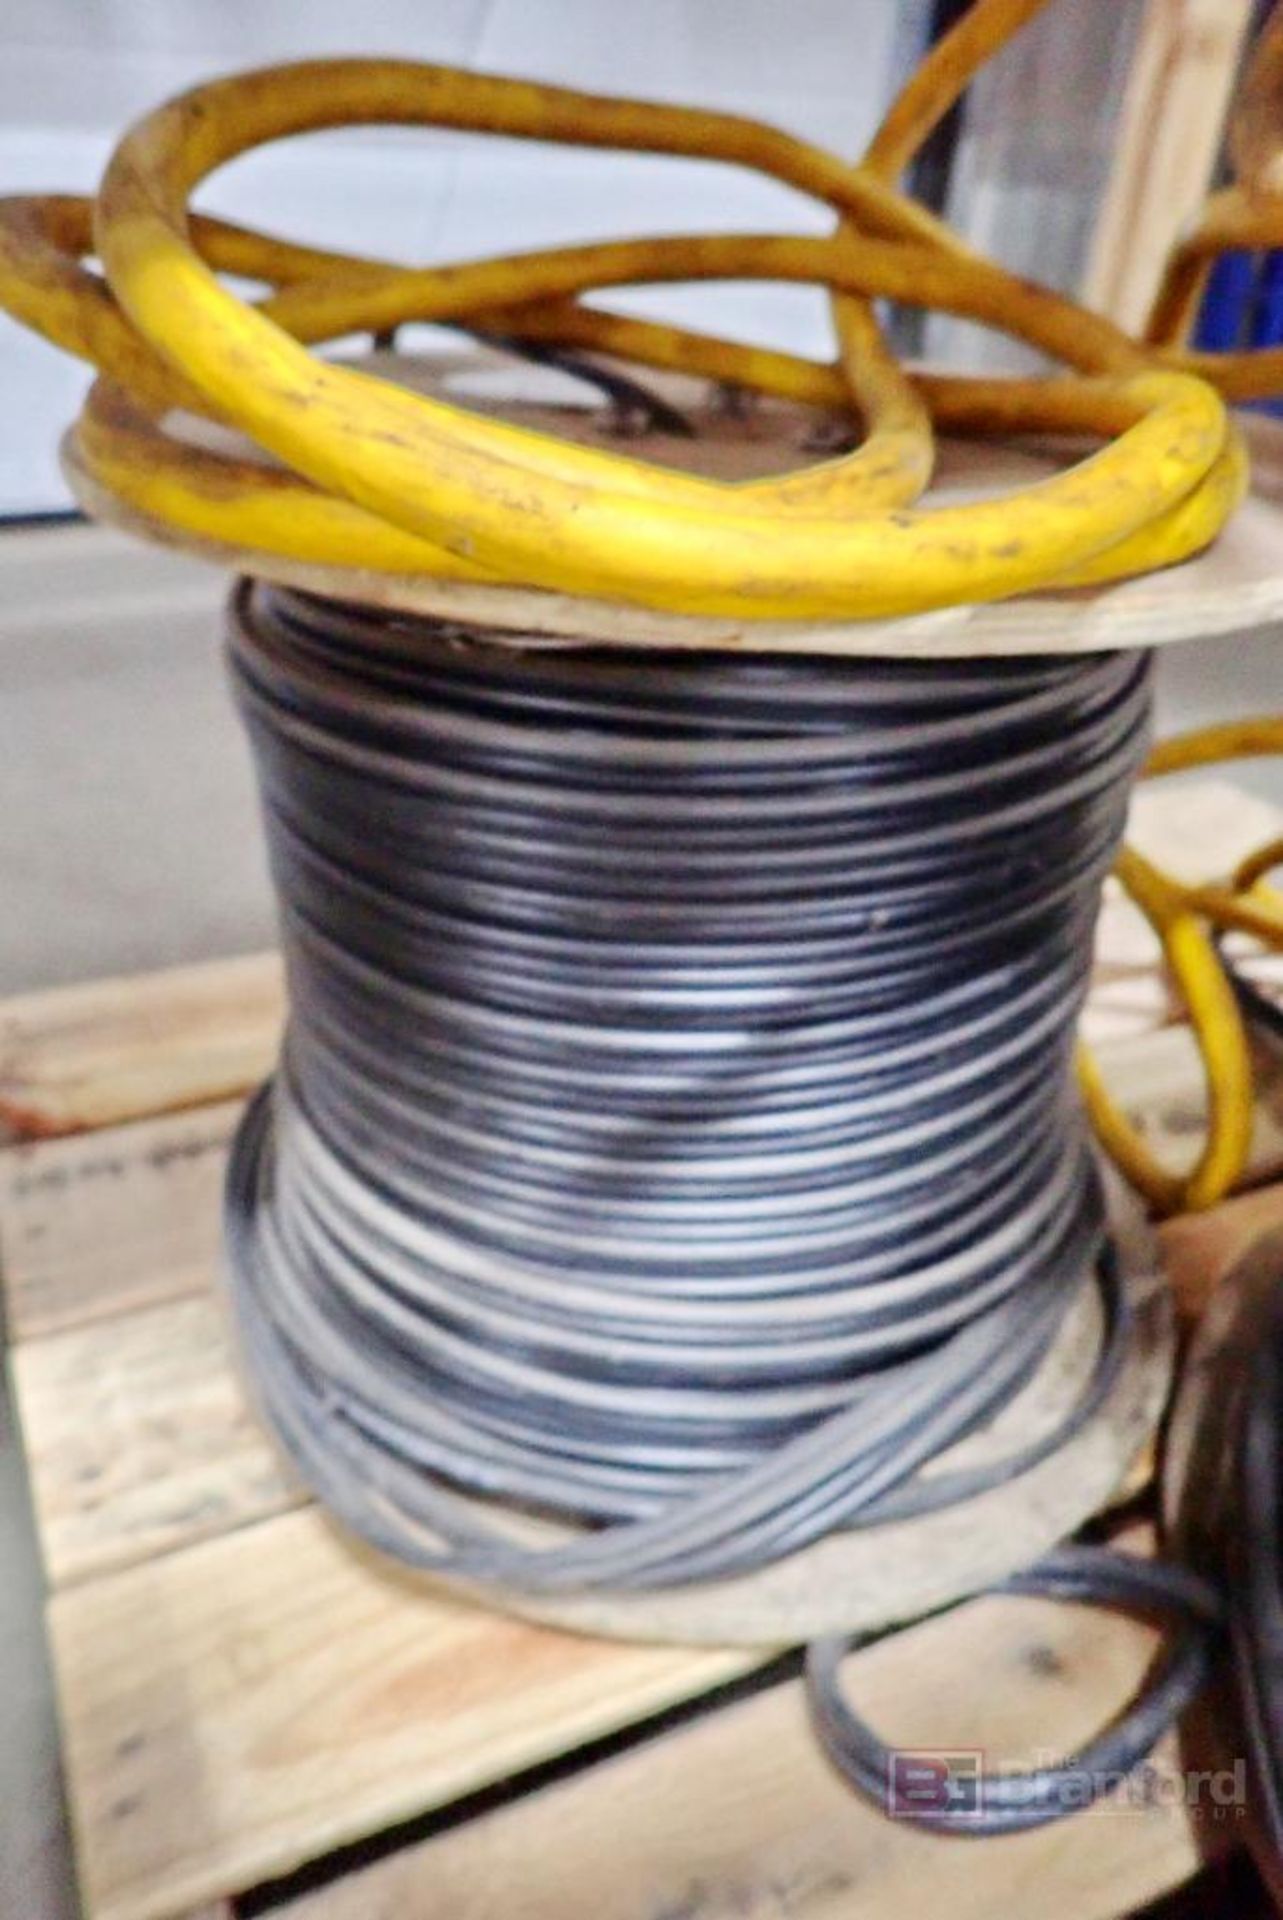 Pallet of Spooled Wire - Image 3 of 4